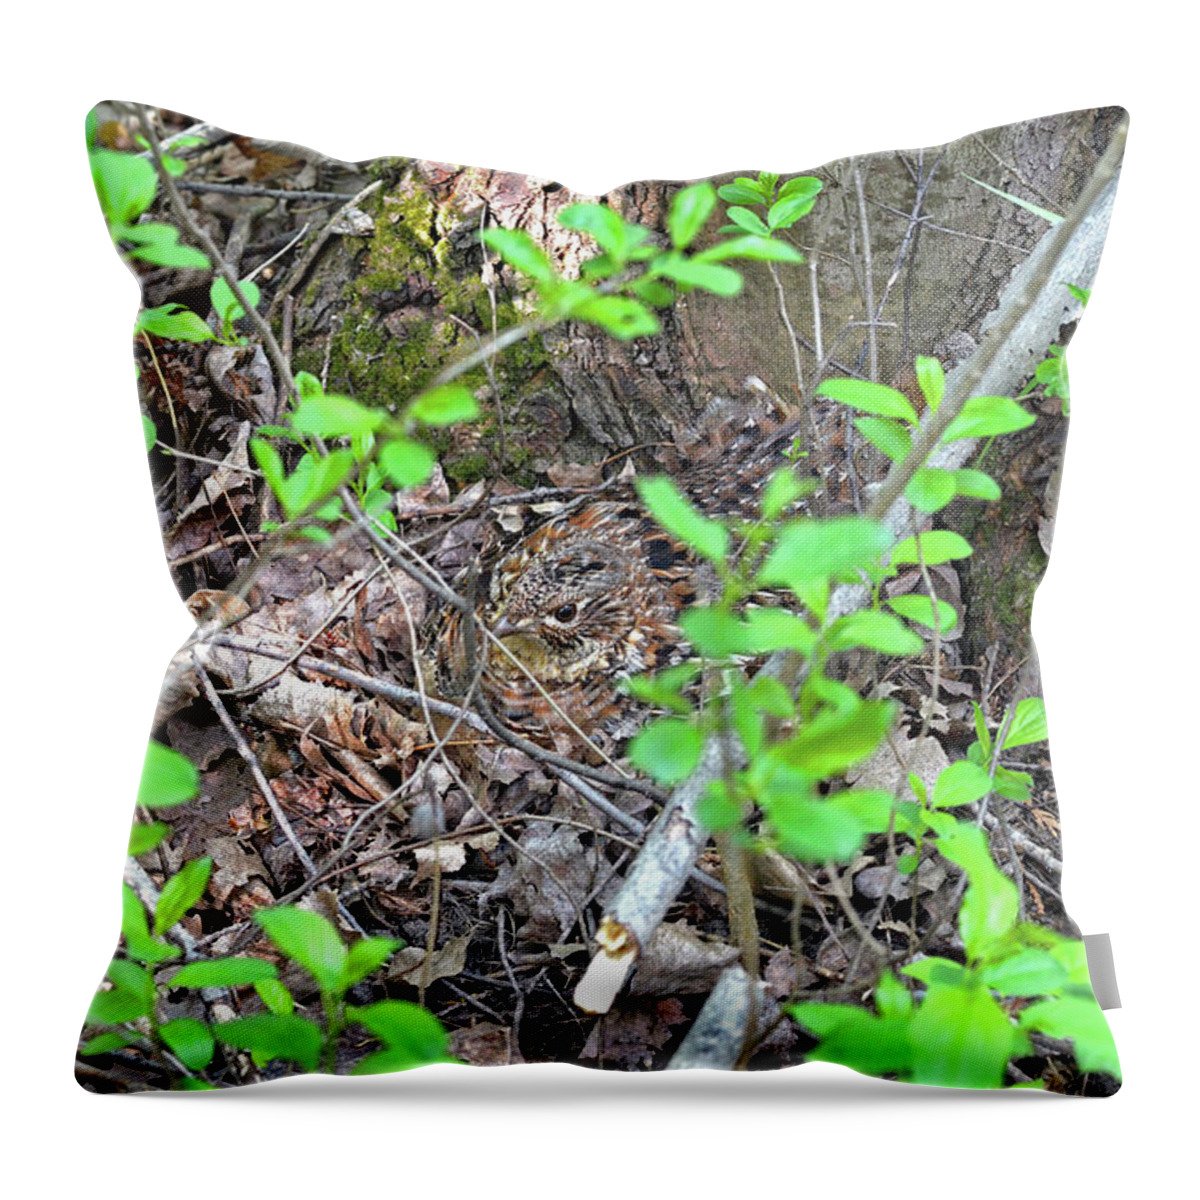 Ruffed Grouse Throw Pillow featuring the photograph Ruffed Grouse incubating her chicks by Asbed Iskedjian